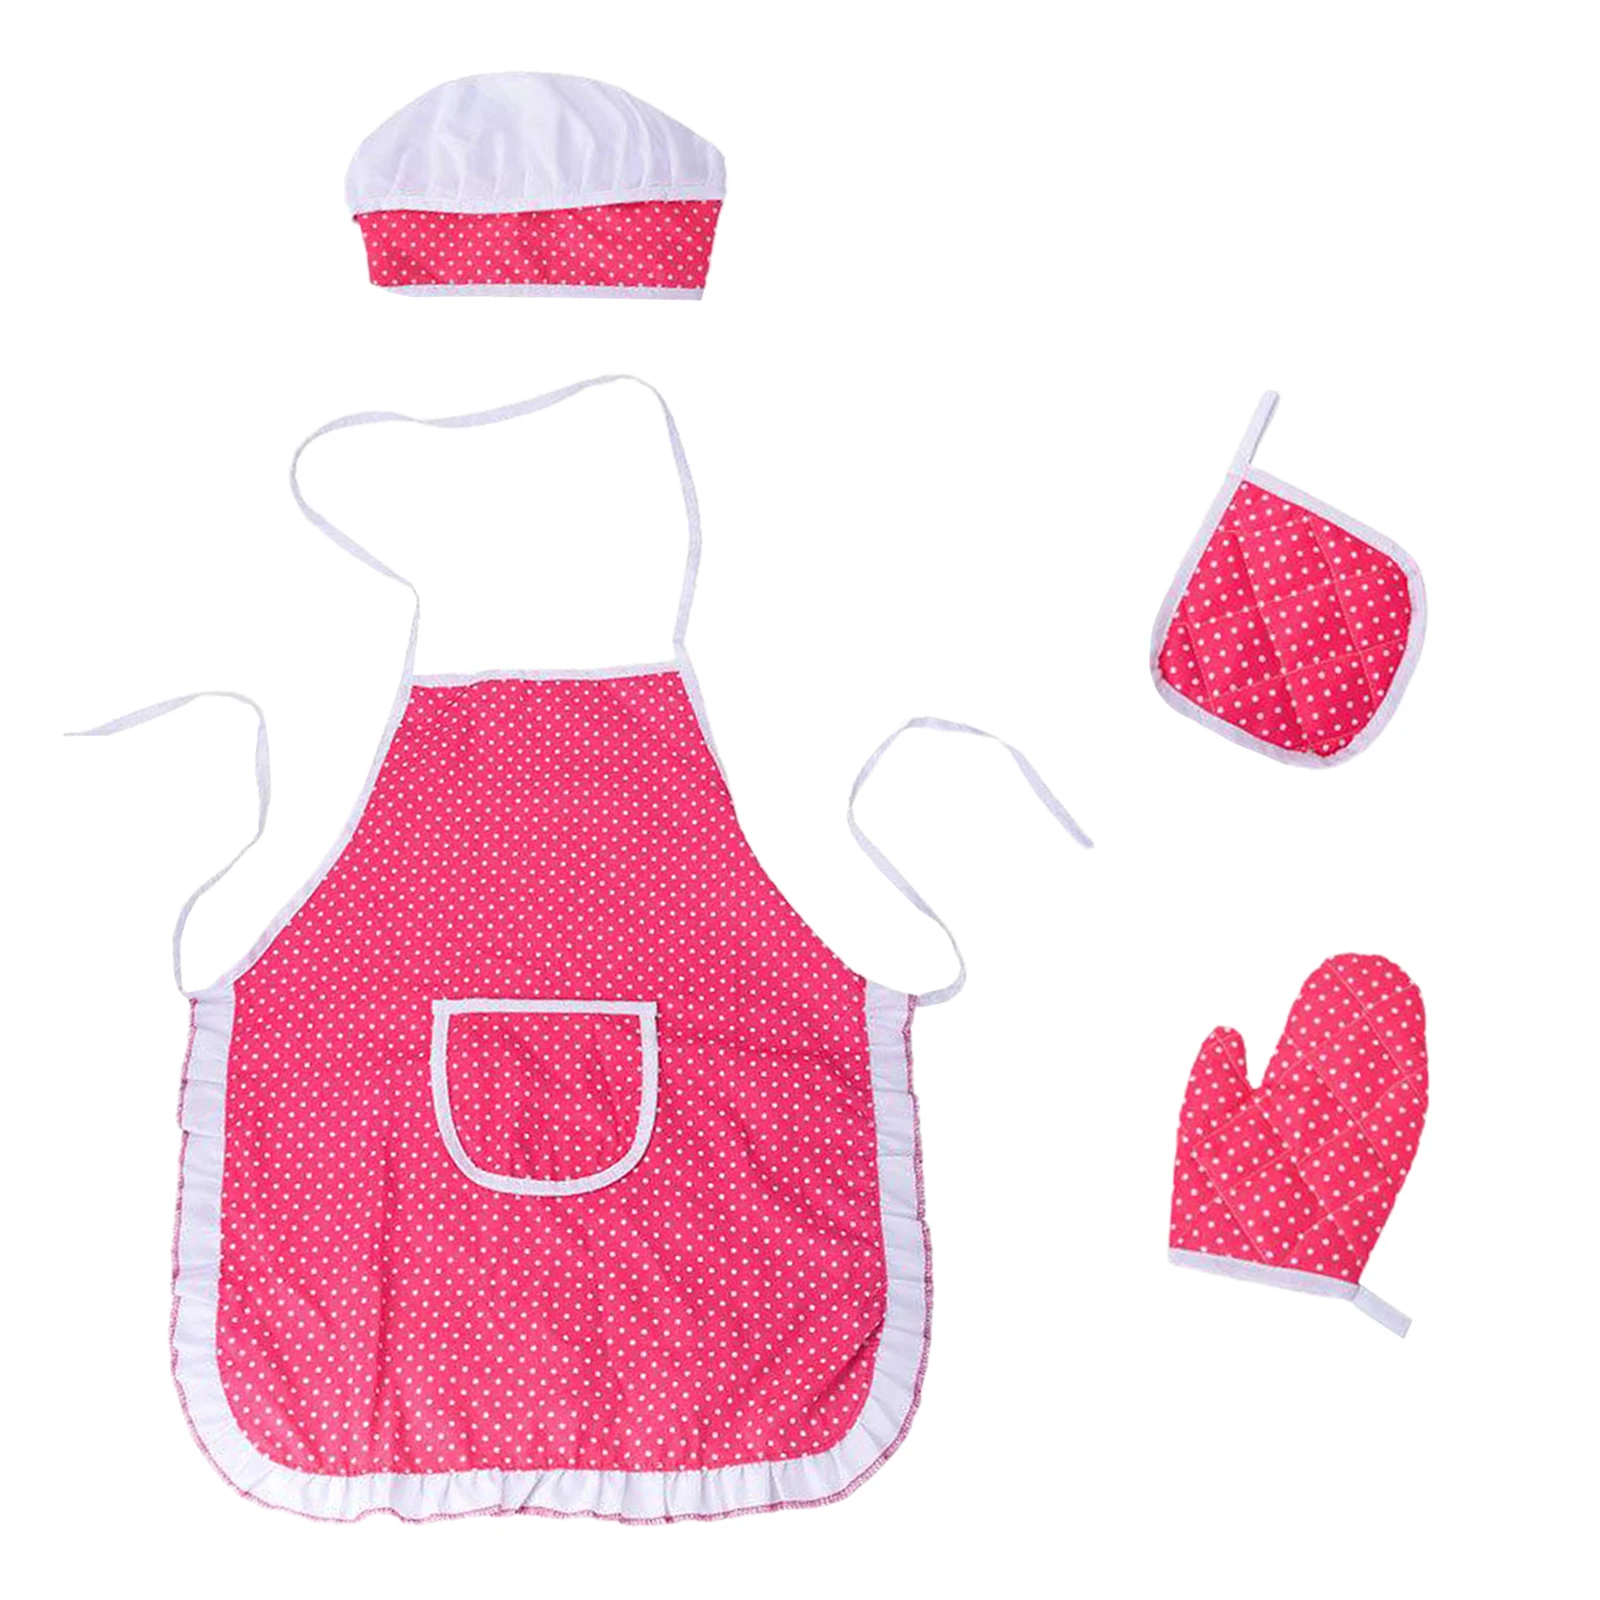 Chef Set for Kids,4Pcs Cooking Set for Boys Girls Toddler Role Play Cook Costume with Apron, Chef Hat, Oven Mitt ,Hot Pad